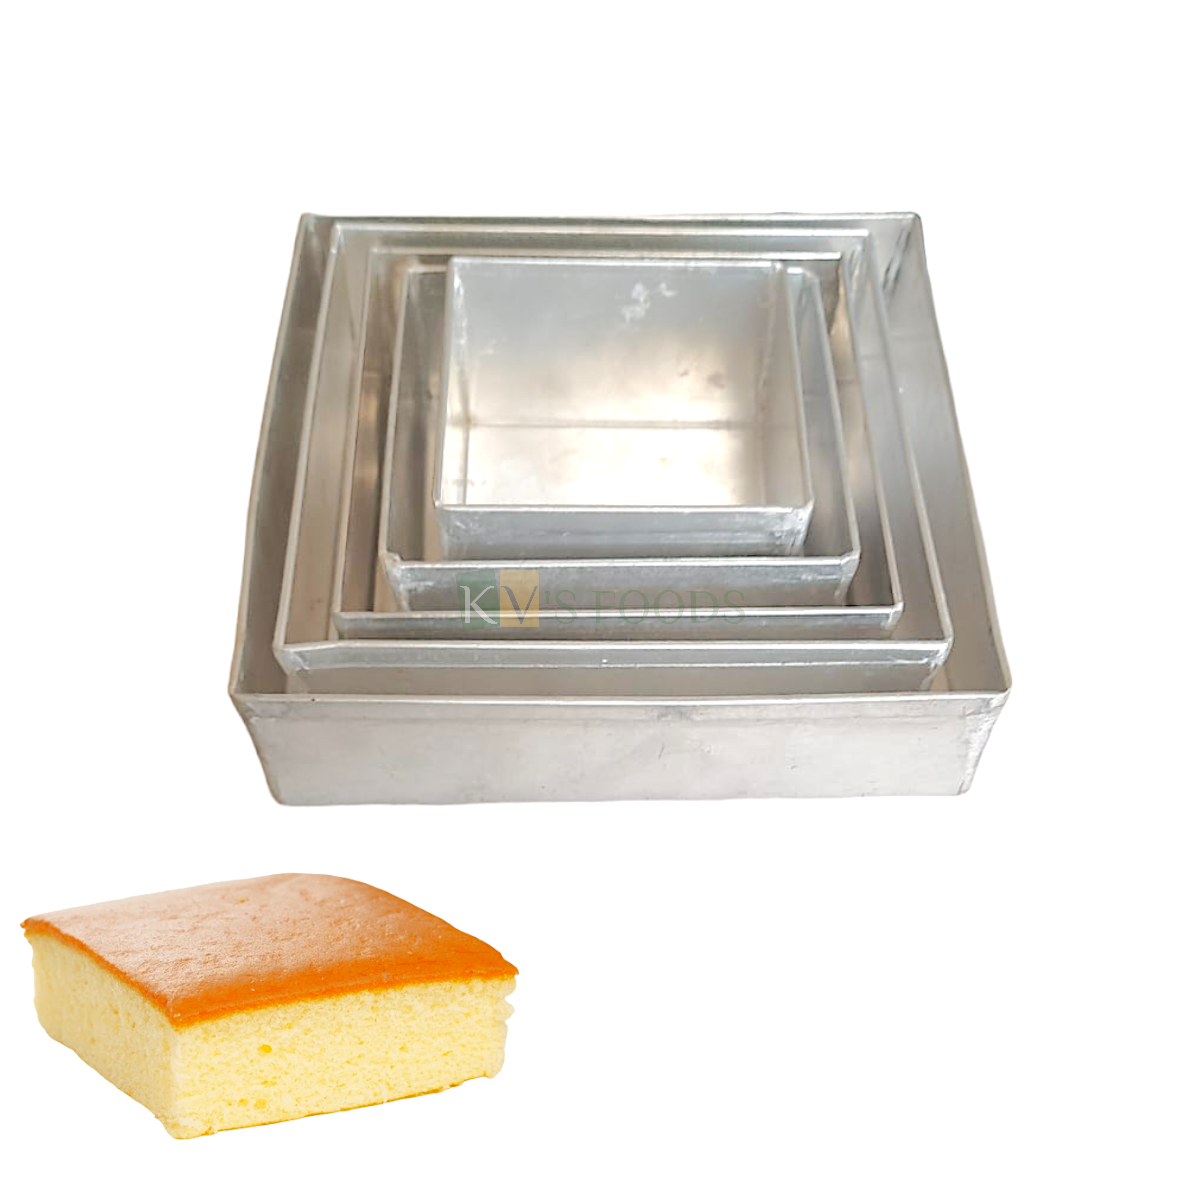 1PC Silver Square Baking Aluminium Loaf Bread Cake Moulds Bakeware Pan, Mousse Pudding Cheese, Friut Cakes, Chocolate, Strawberry Cakes Mould Tins Tray for Oven, Birthday Party